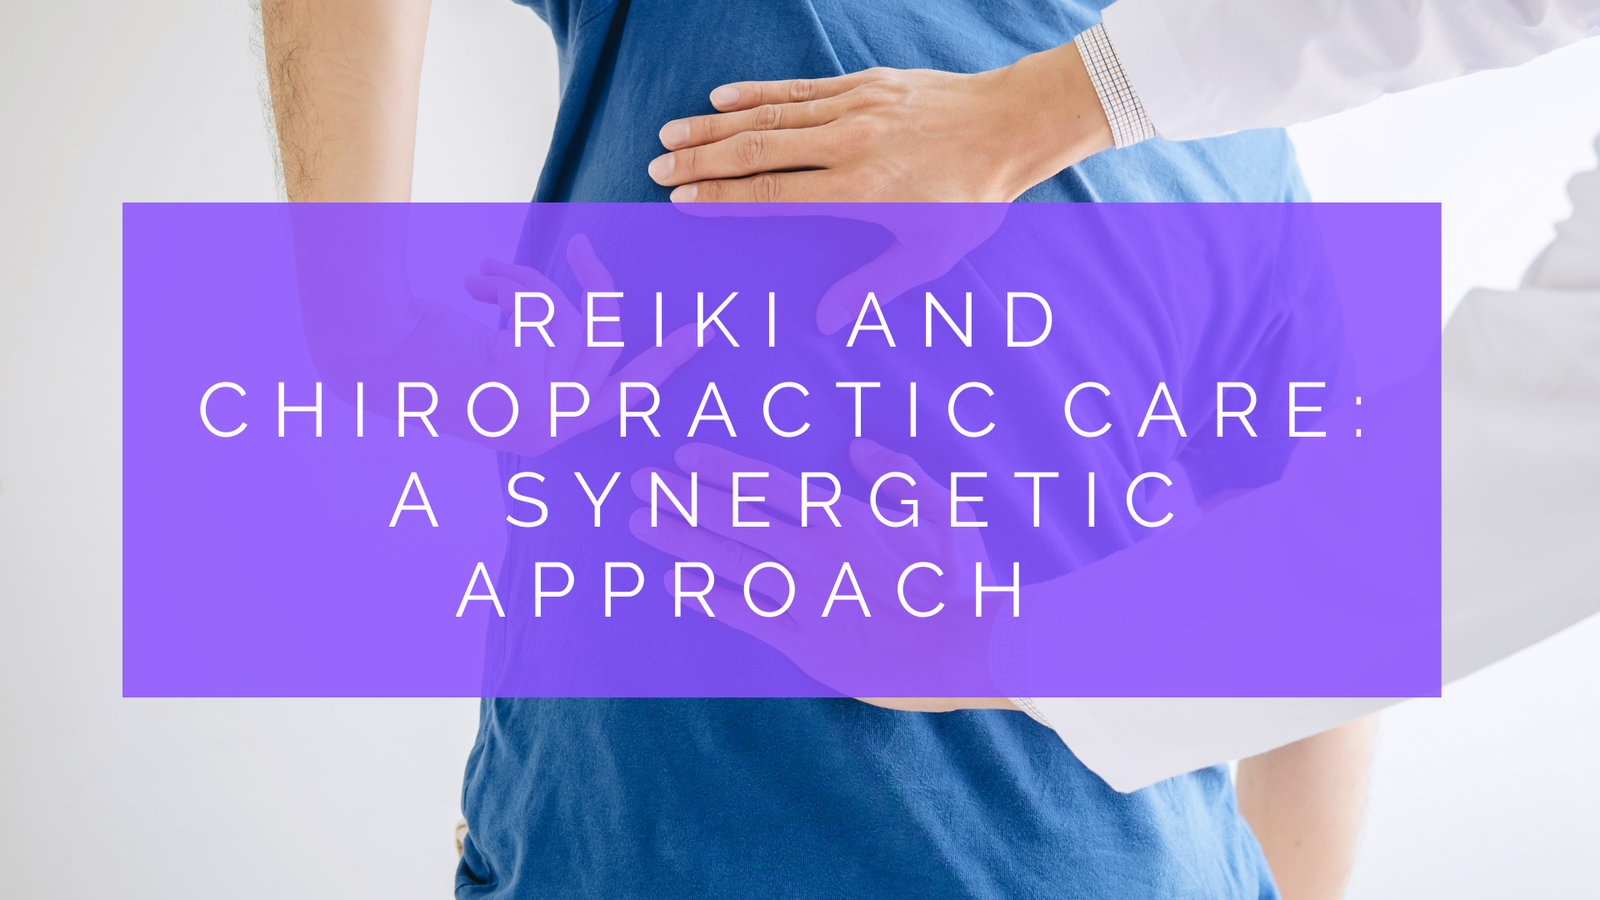 Combining Reiki and Chiropractic Care: A Synergetic Approach